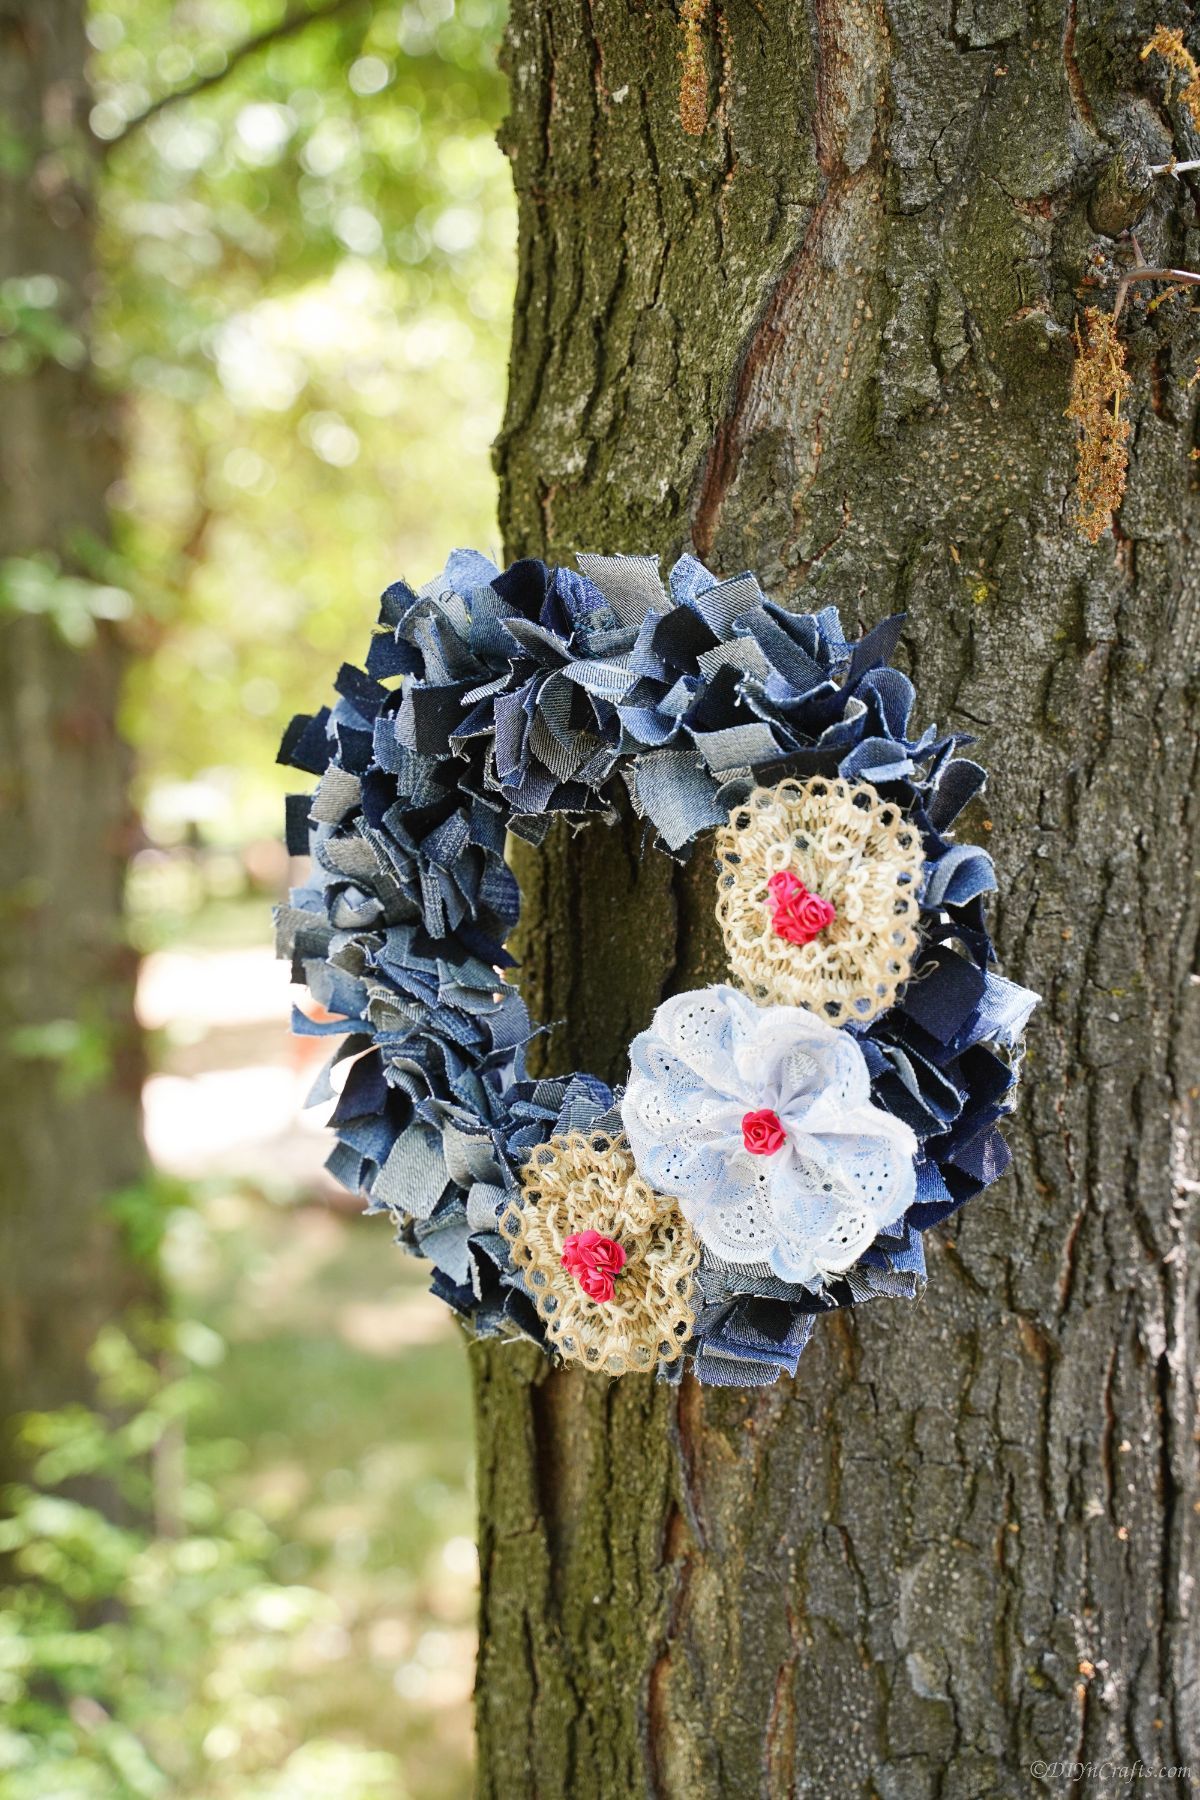 denim and lace wreath hanging on tree